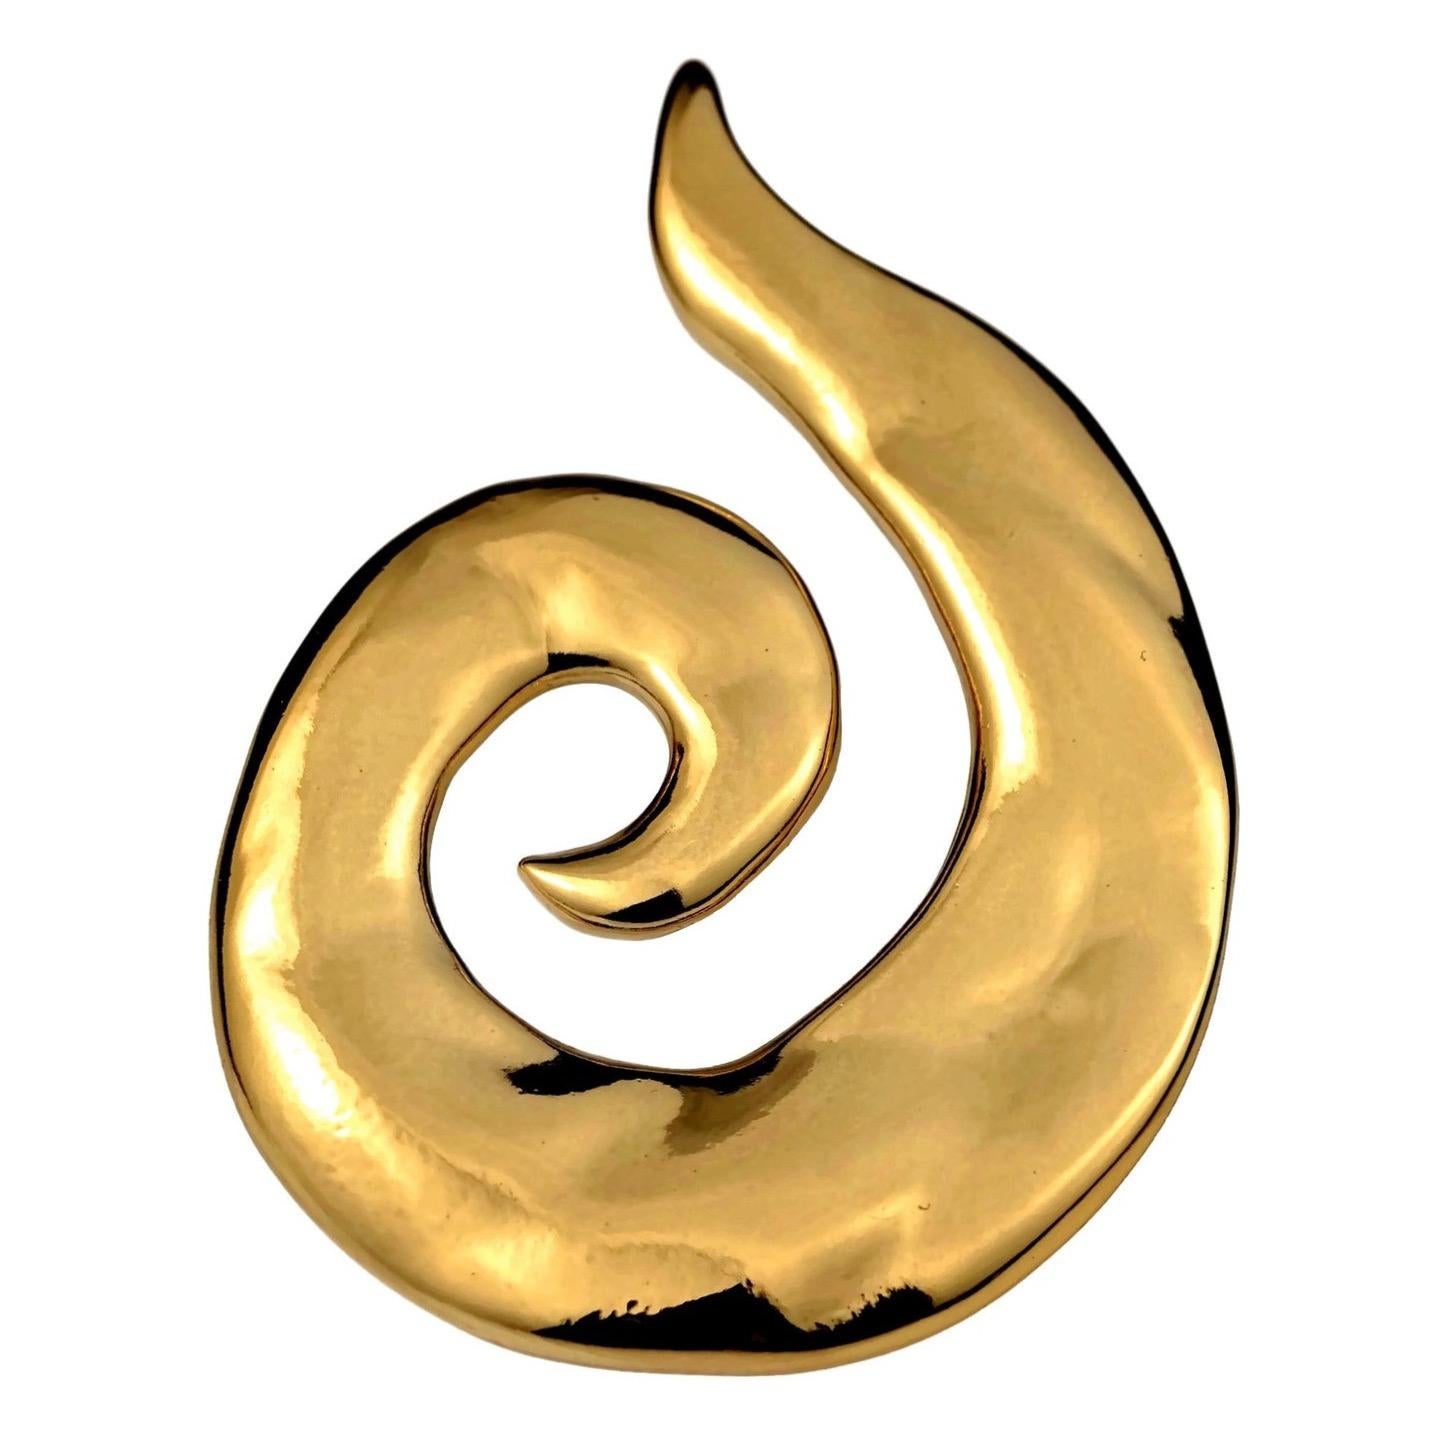 Vintage YVES SAINT LAURENT Ysl Coiled Spiral Brooch In Excellent Condition For Sale In Kingersheim, Alsace